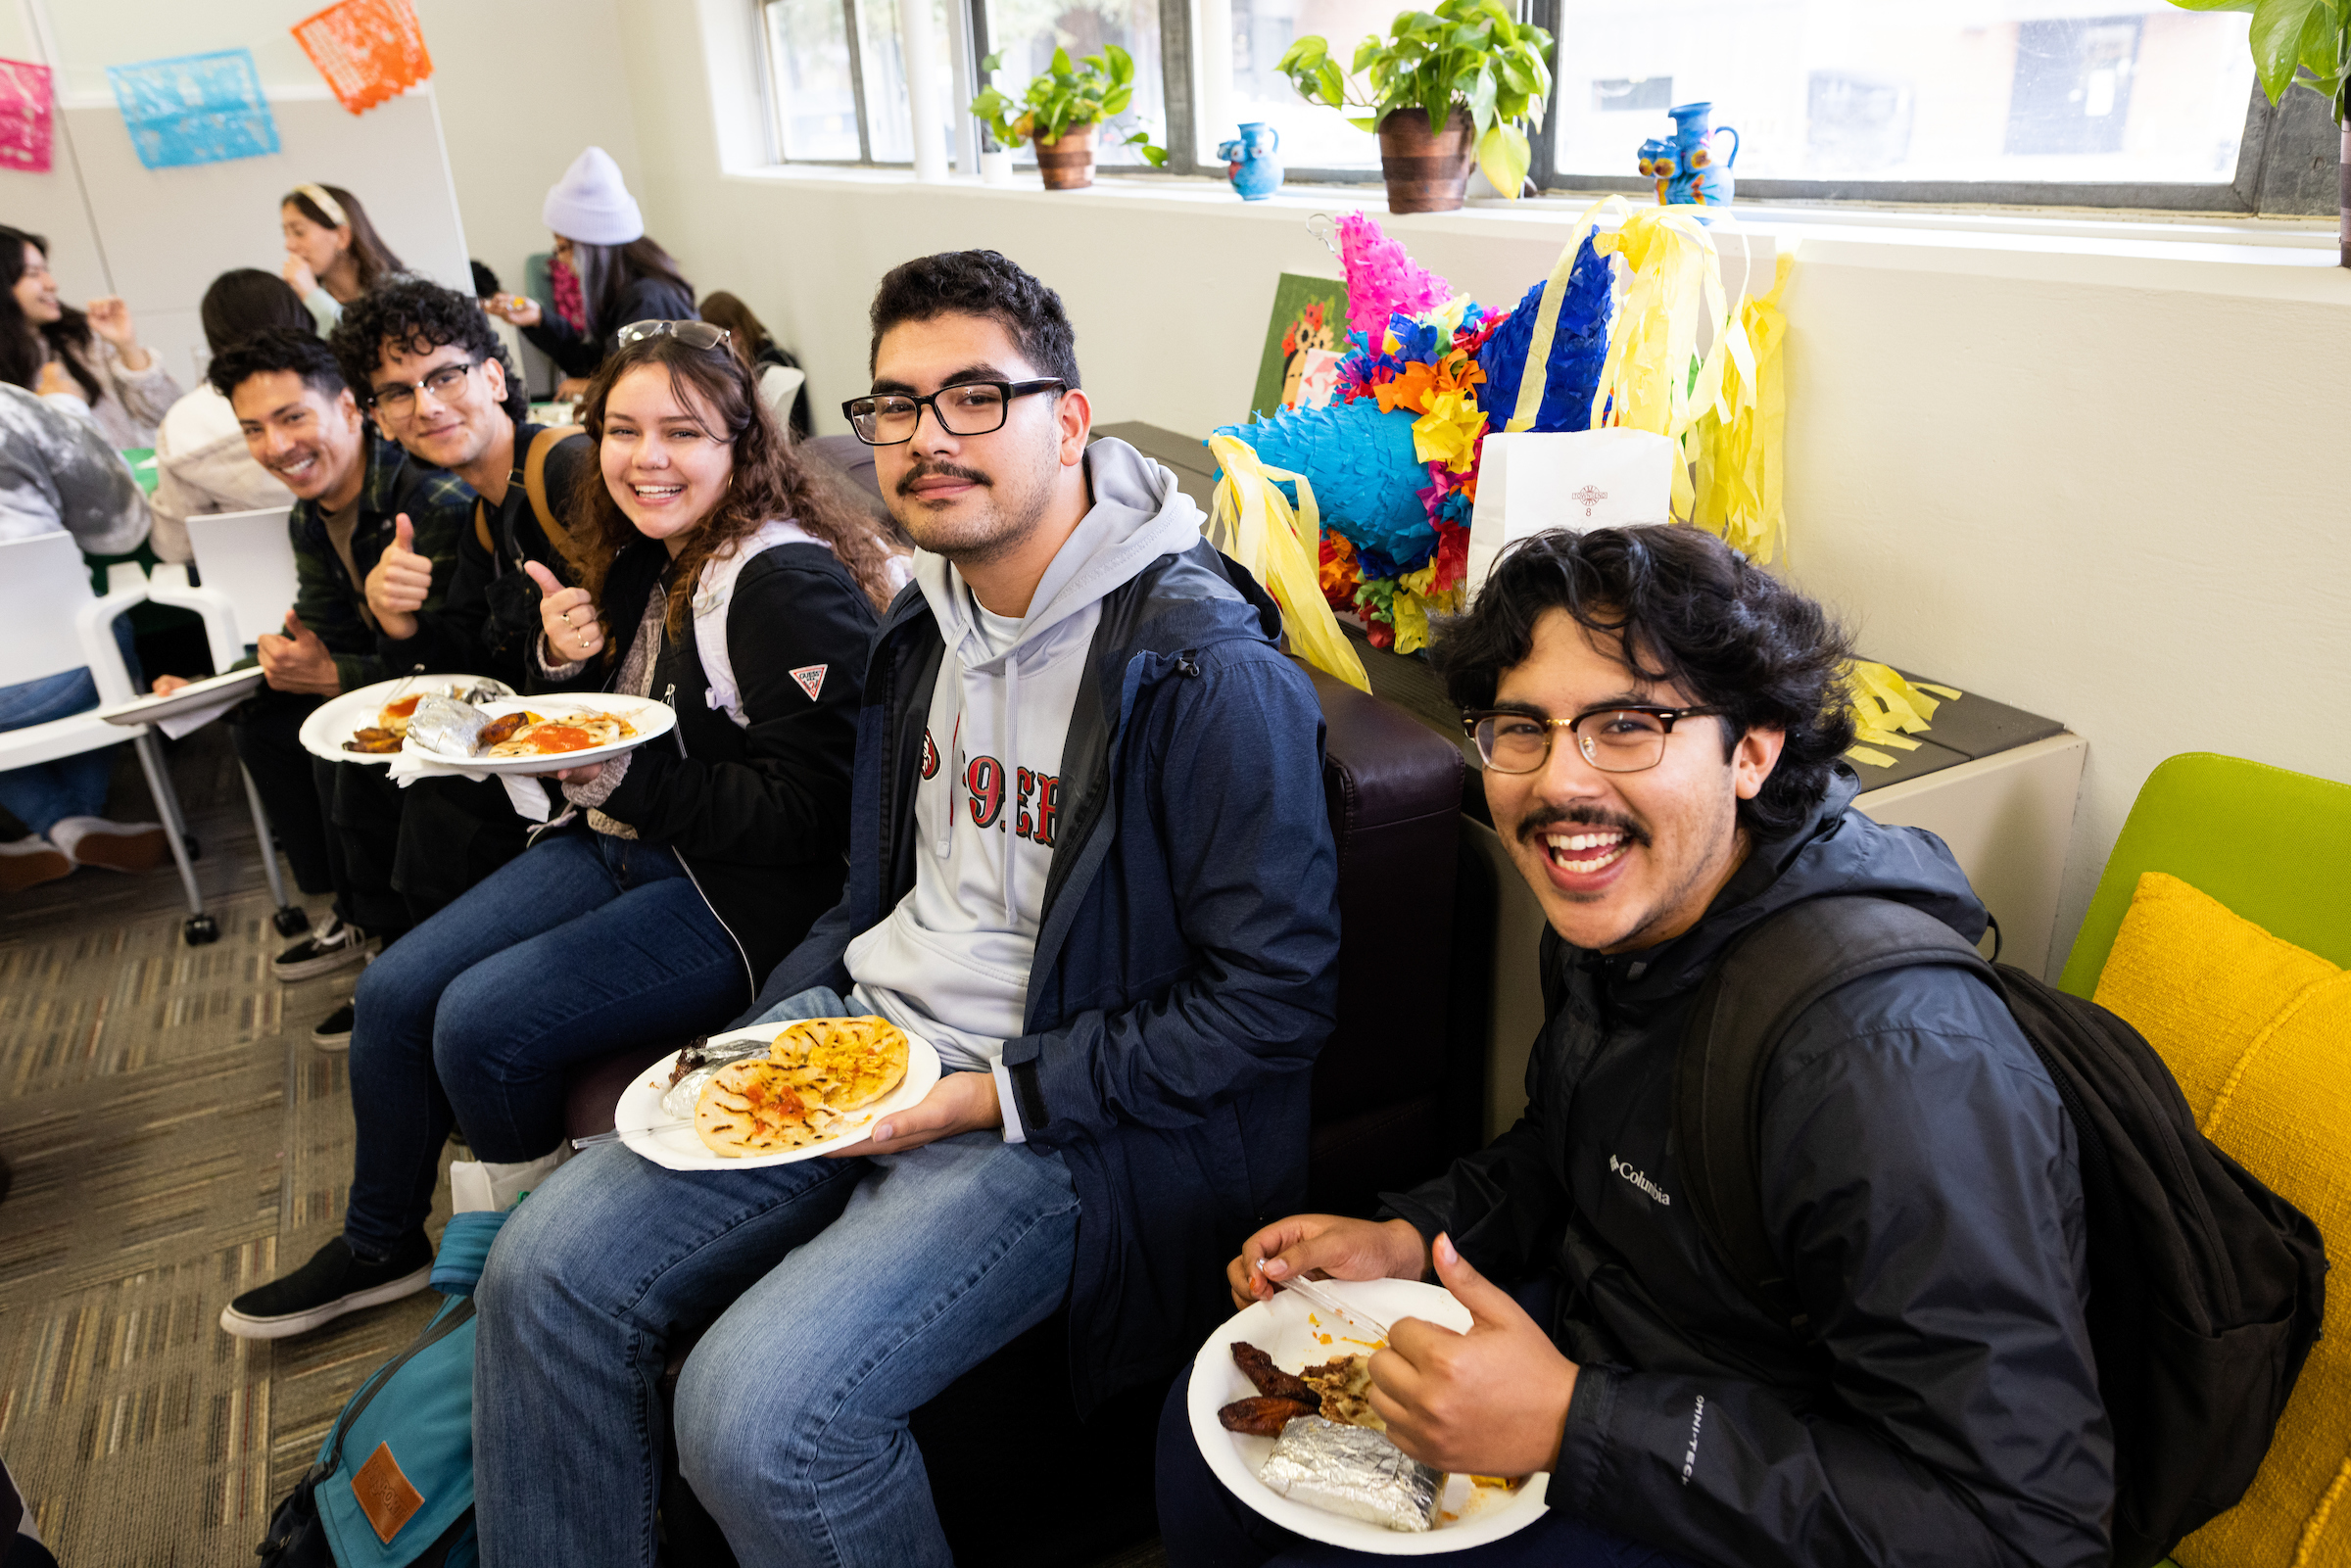 Students eating food and enjoying each other's company at the newly-opened latinx center.